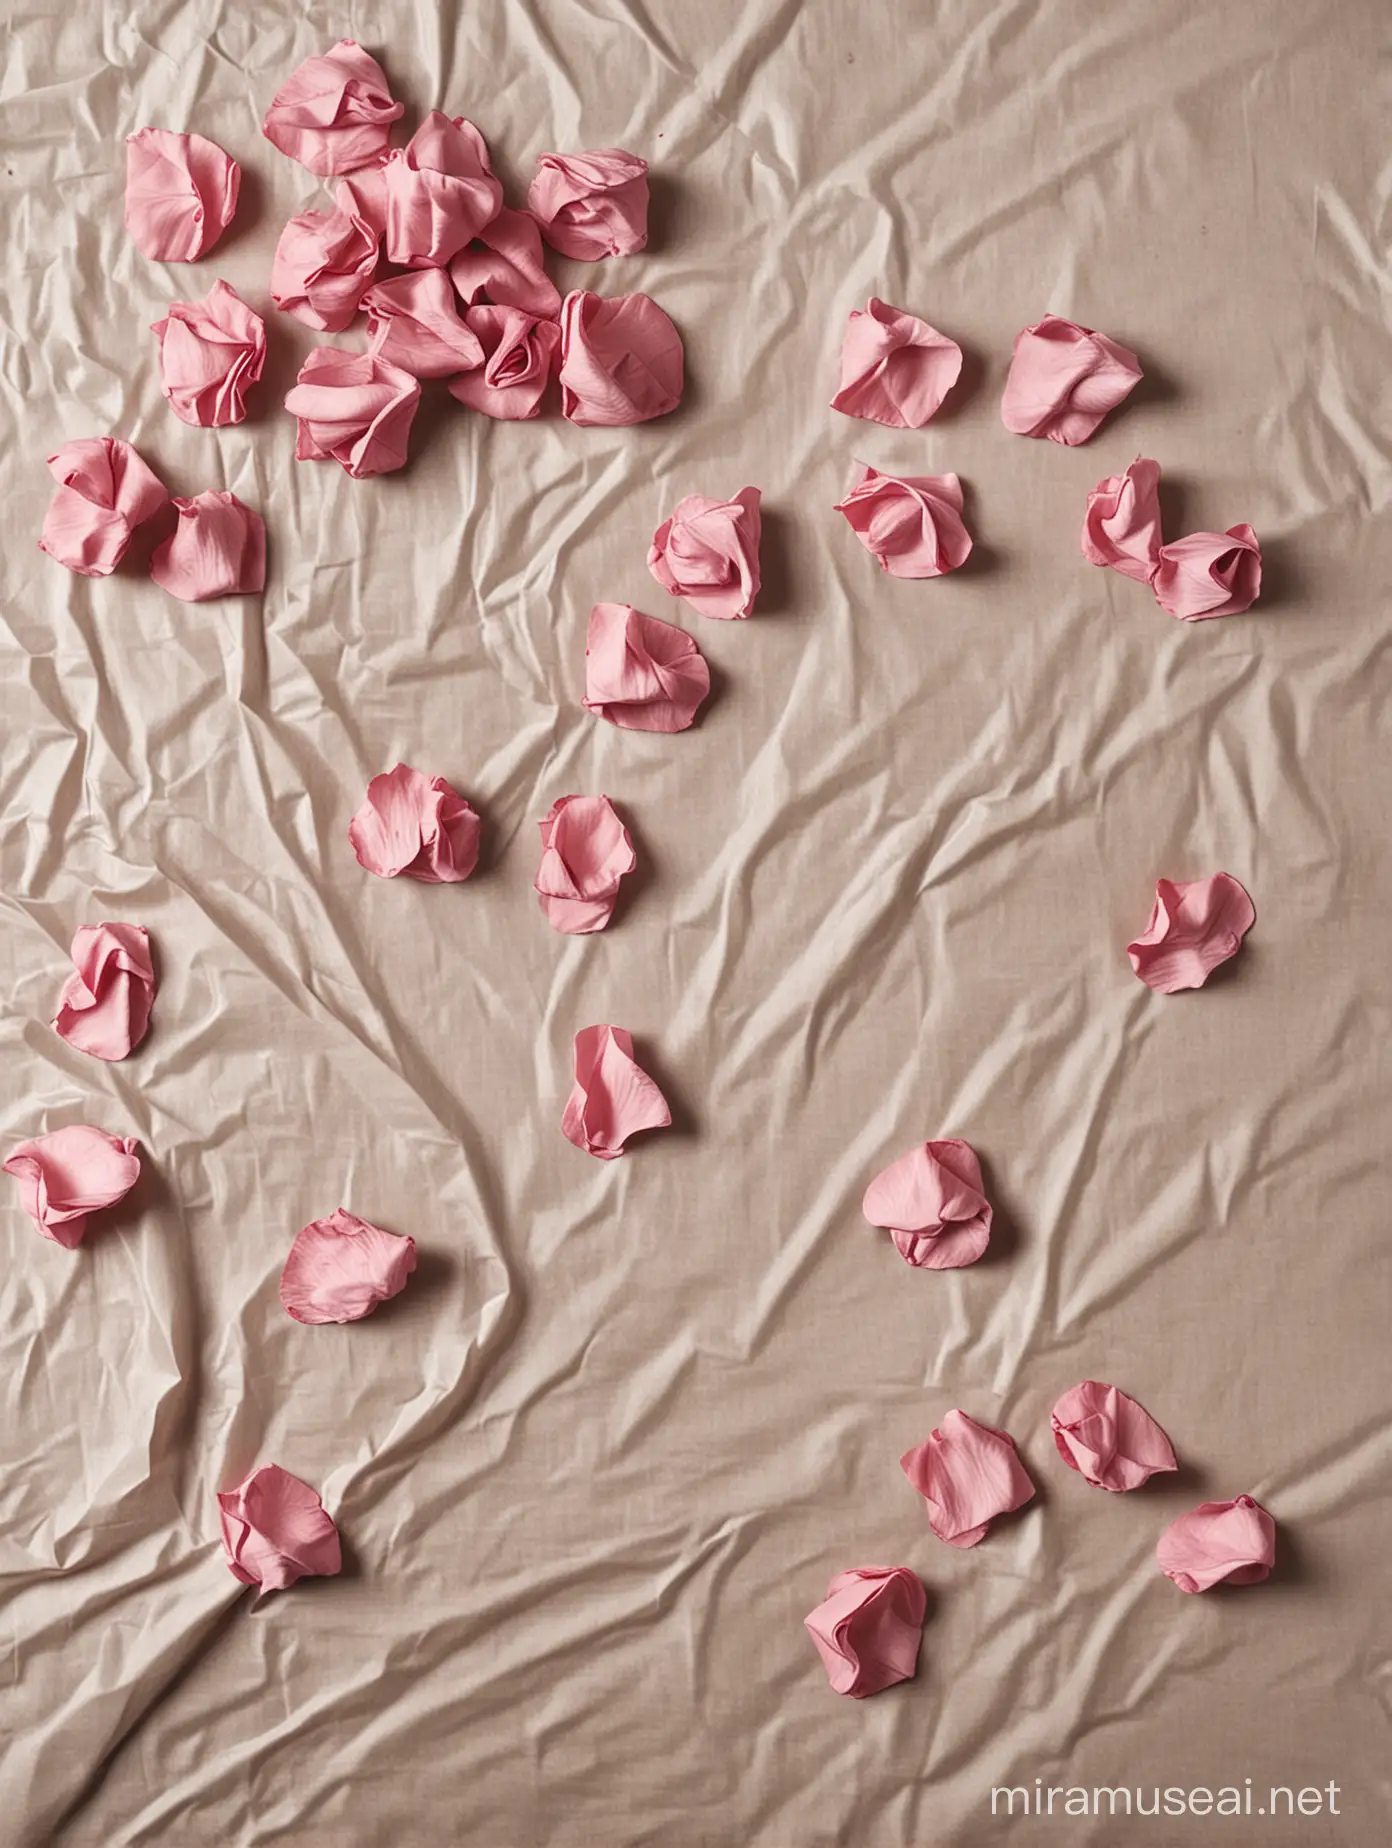 Passionate Romance Crumpled Sheet Rose Petals and Whip